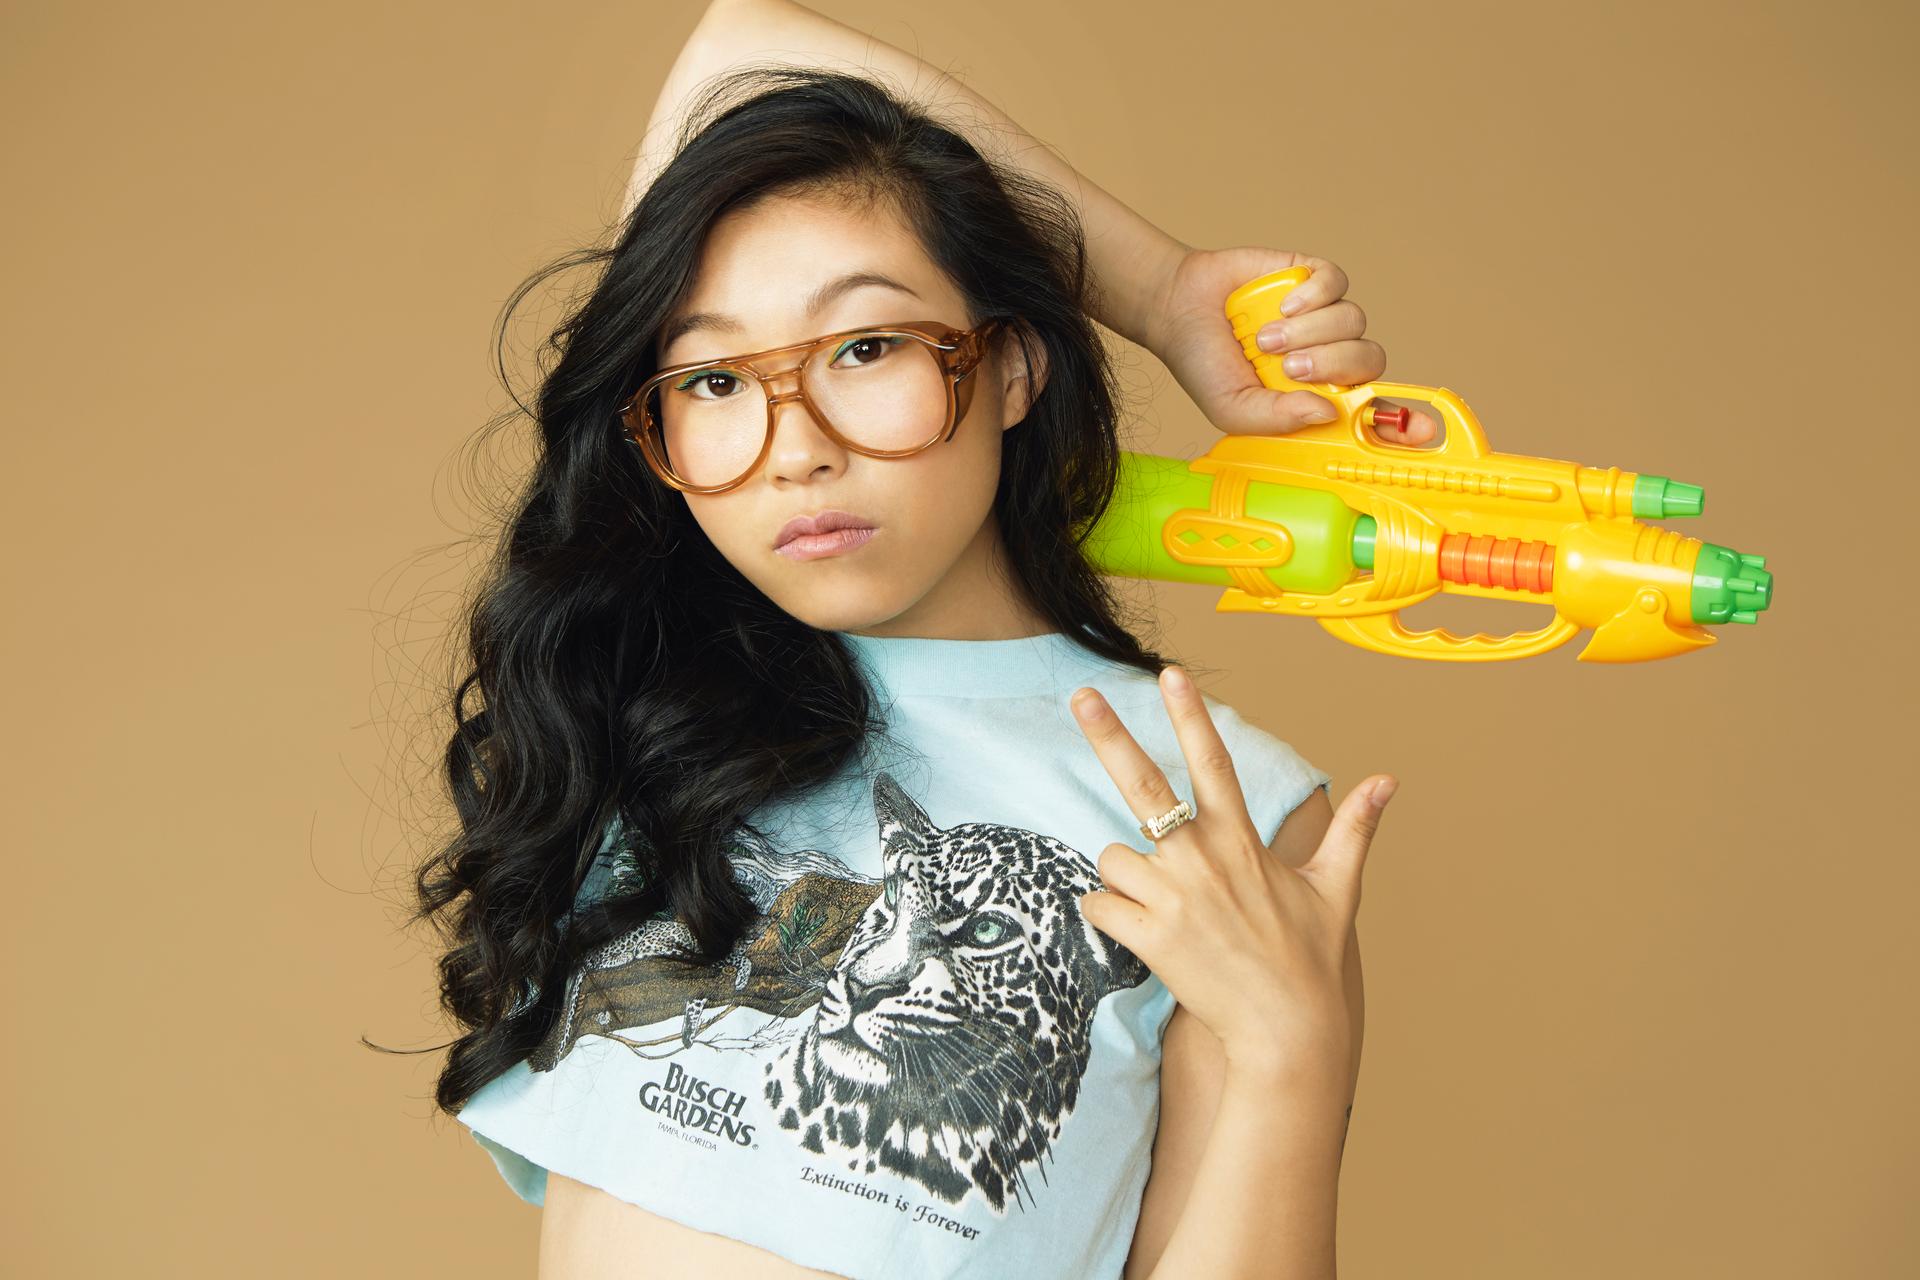 Queens-born rapper Awkwafina has become a hit for her smart, comedic lyrics and offbeat style.